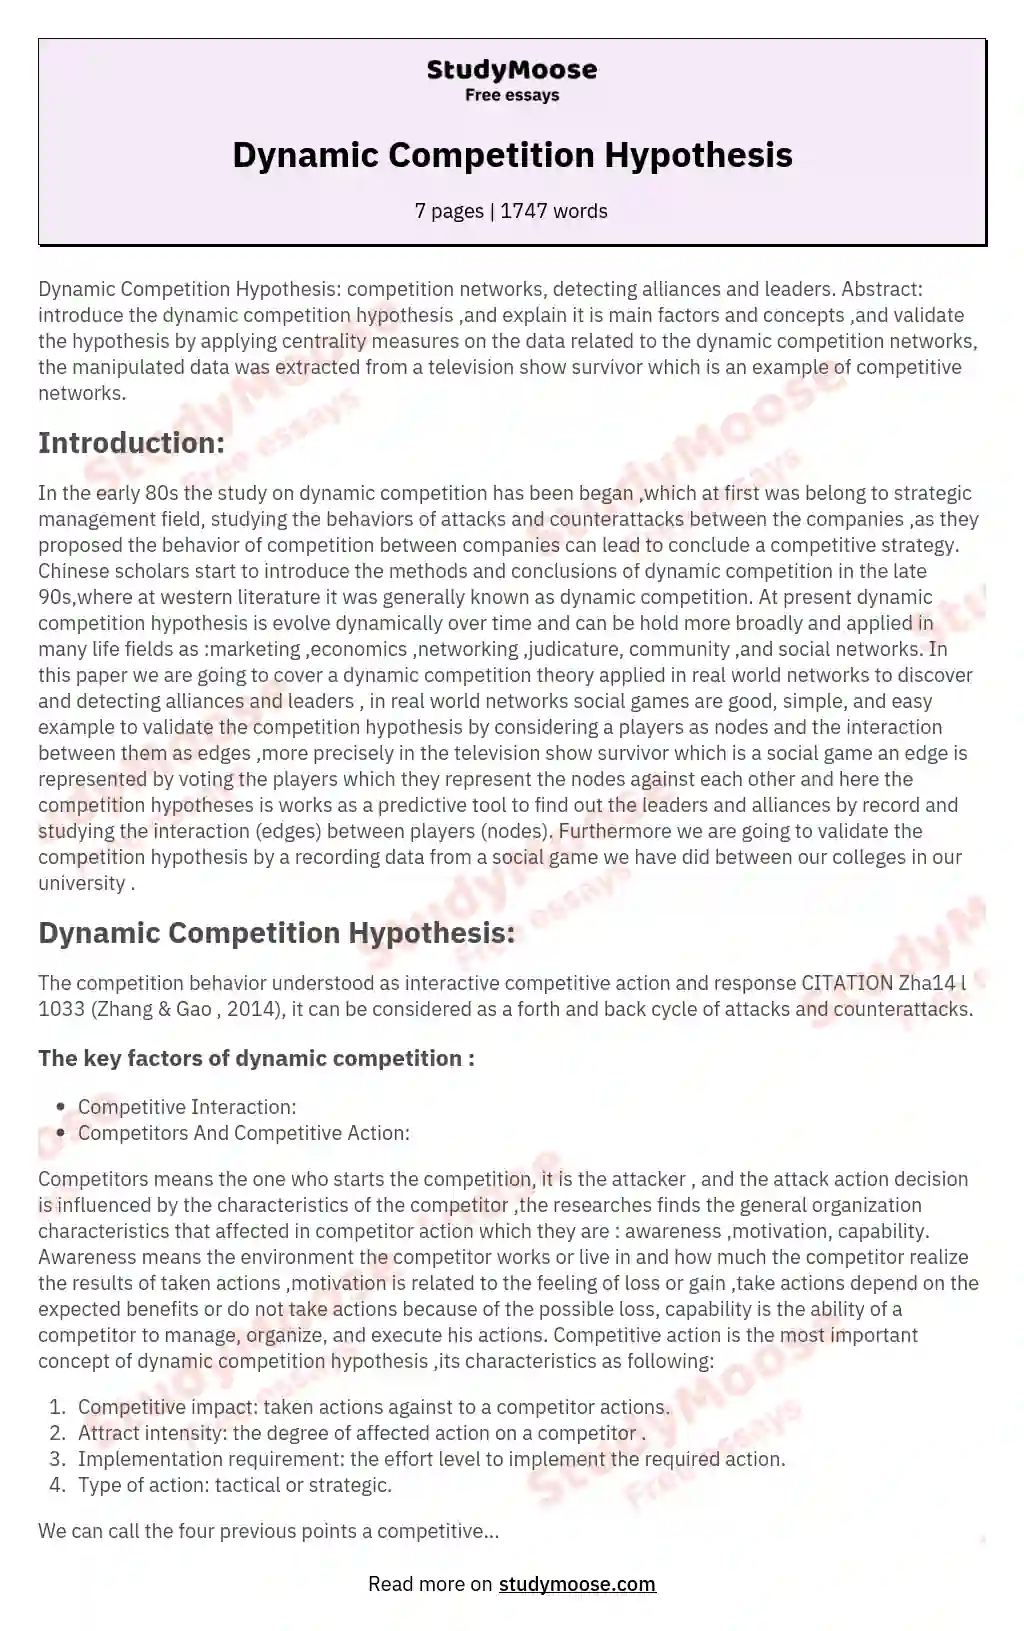 Dynamic Competition Hypothesis essay